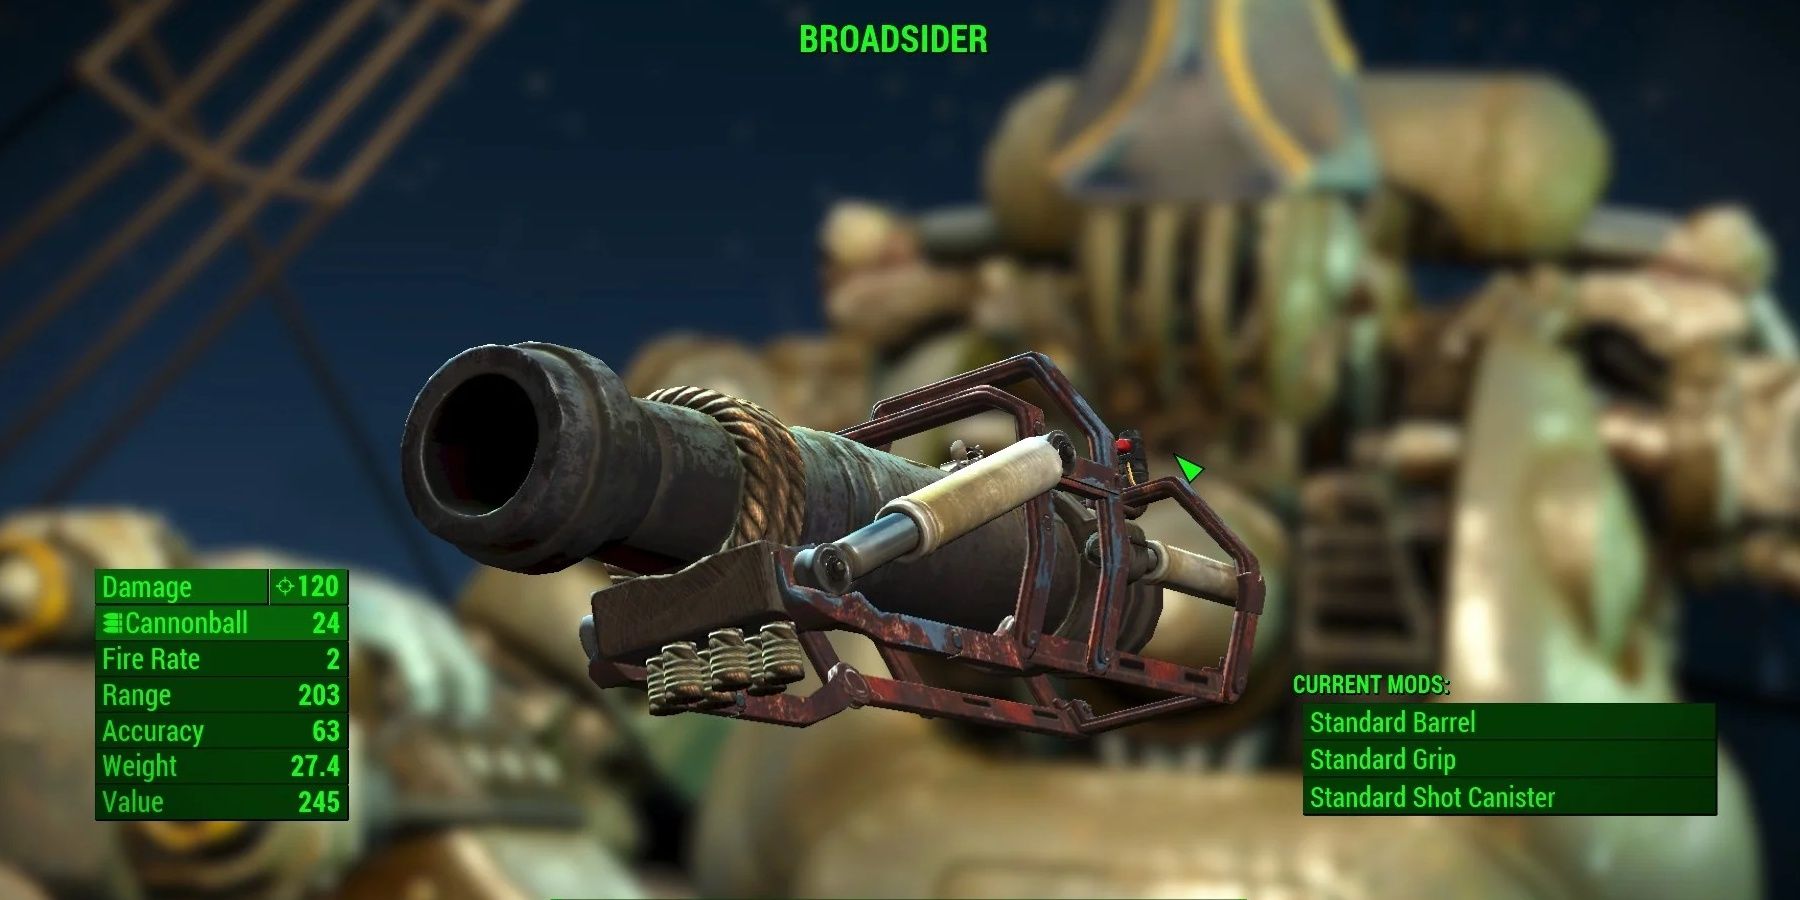 The Broadsider From Fallout 4